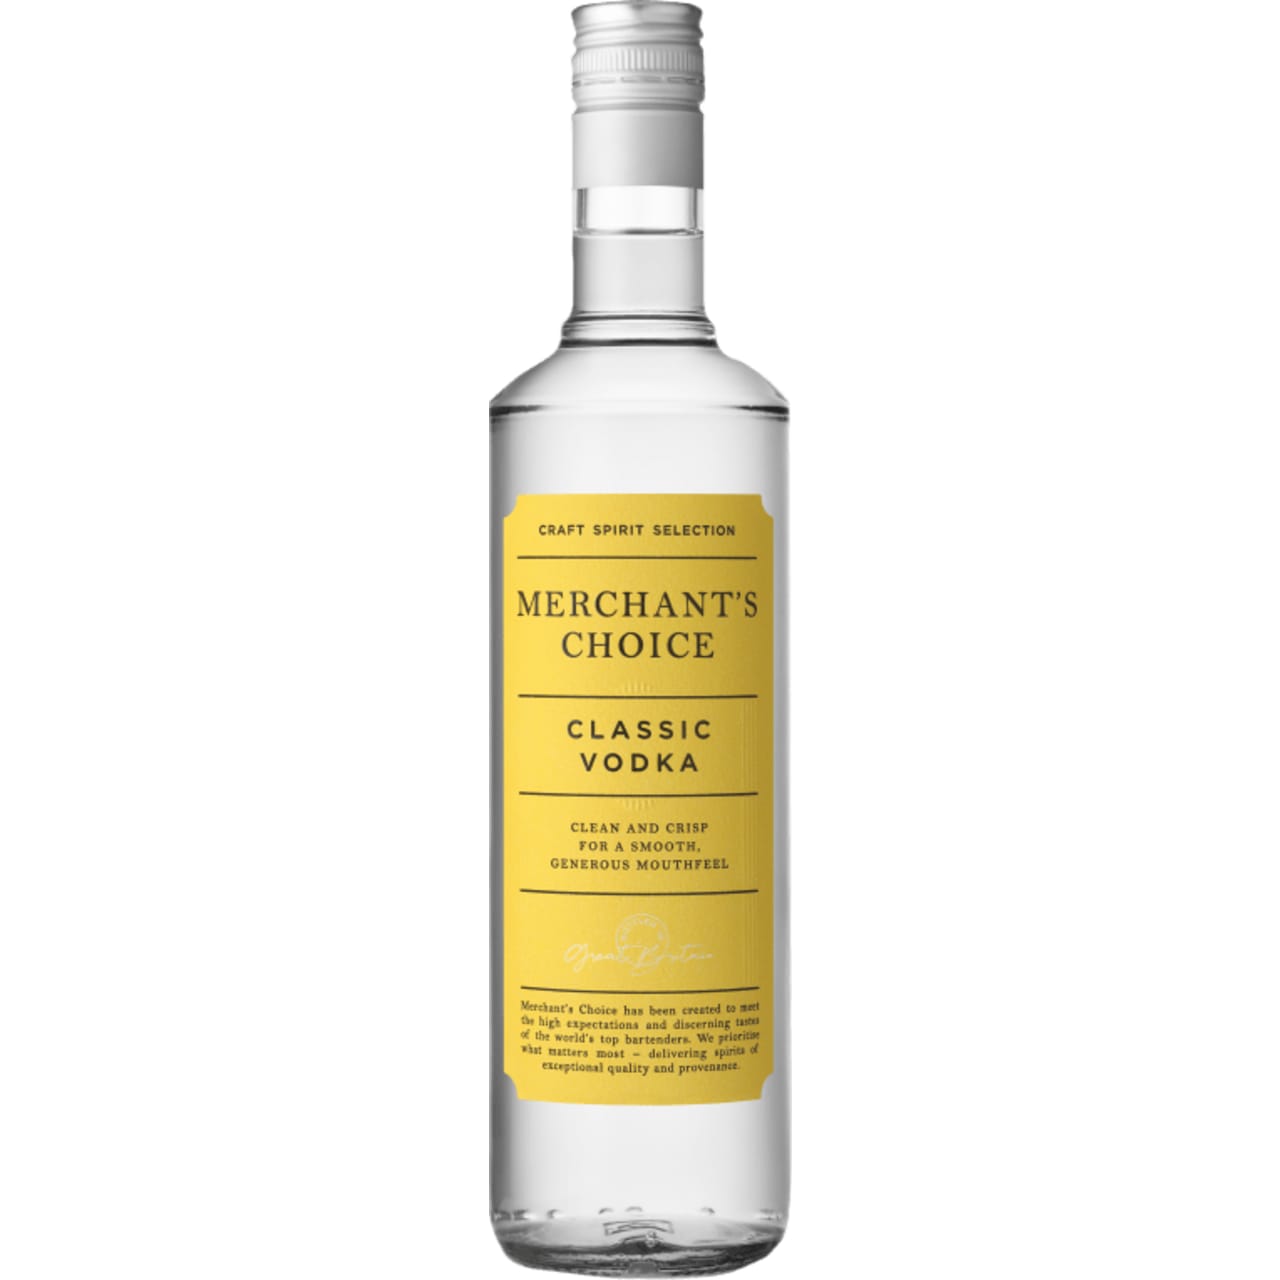 The wheat comes through offering up a generous mouthfeel and a slight cereal note. Overall, the vodka is clean and crisp.